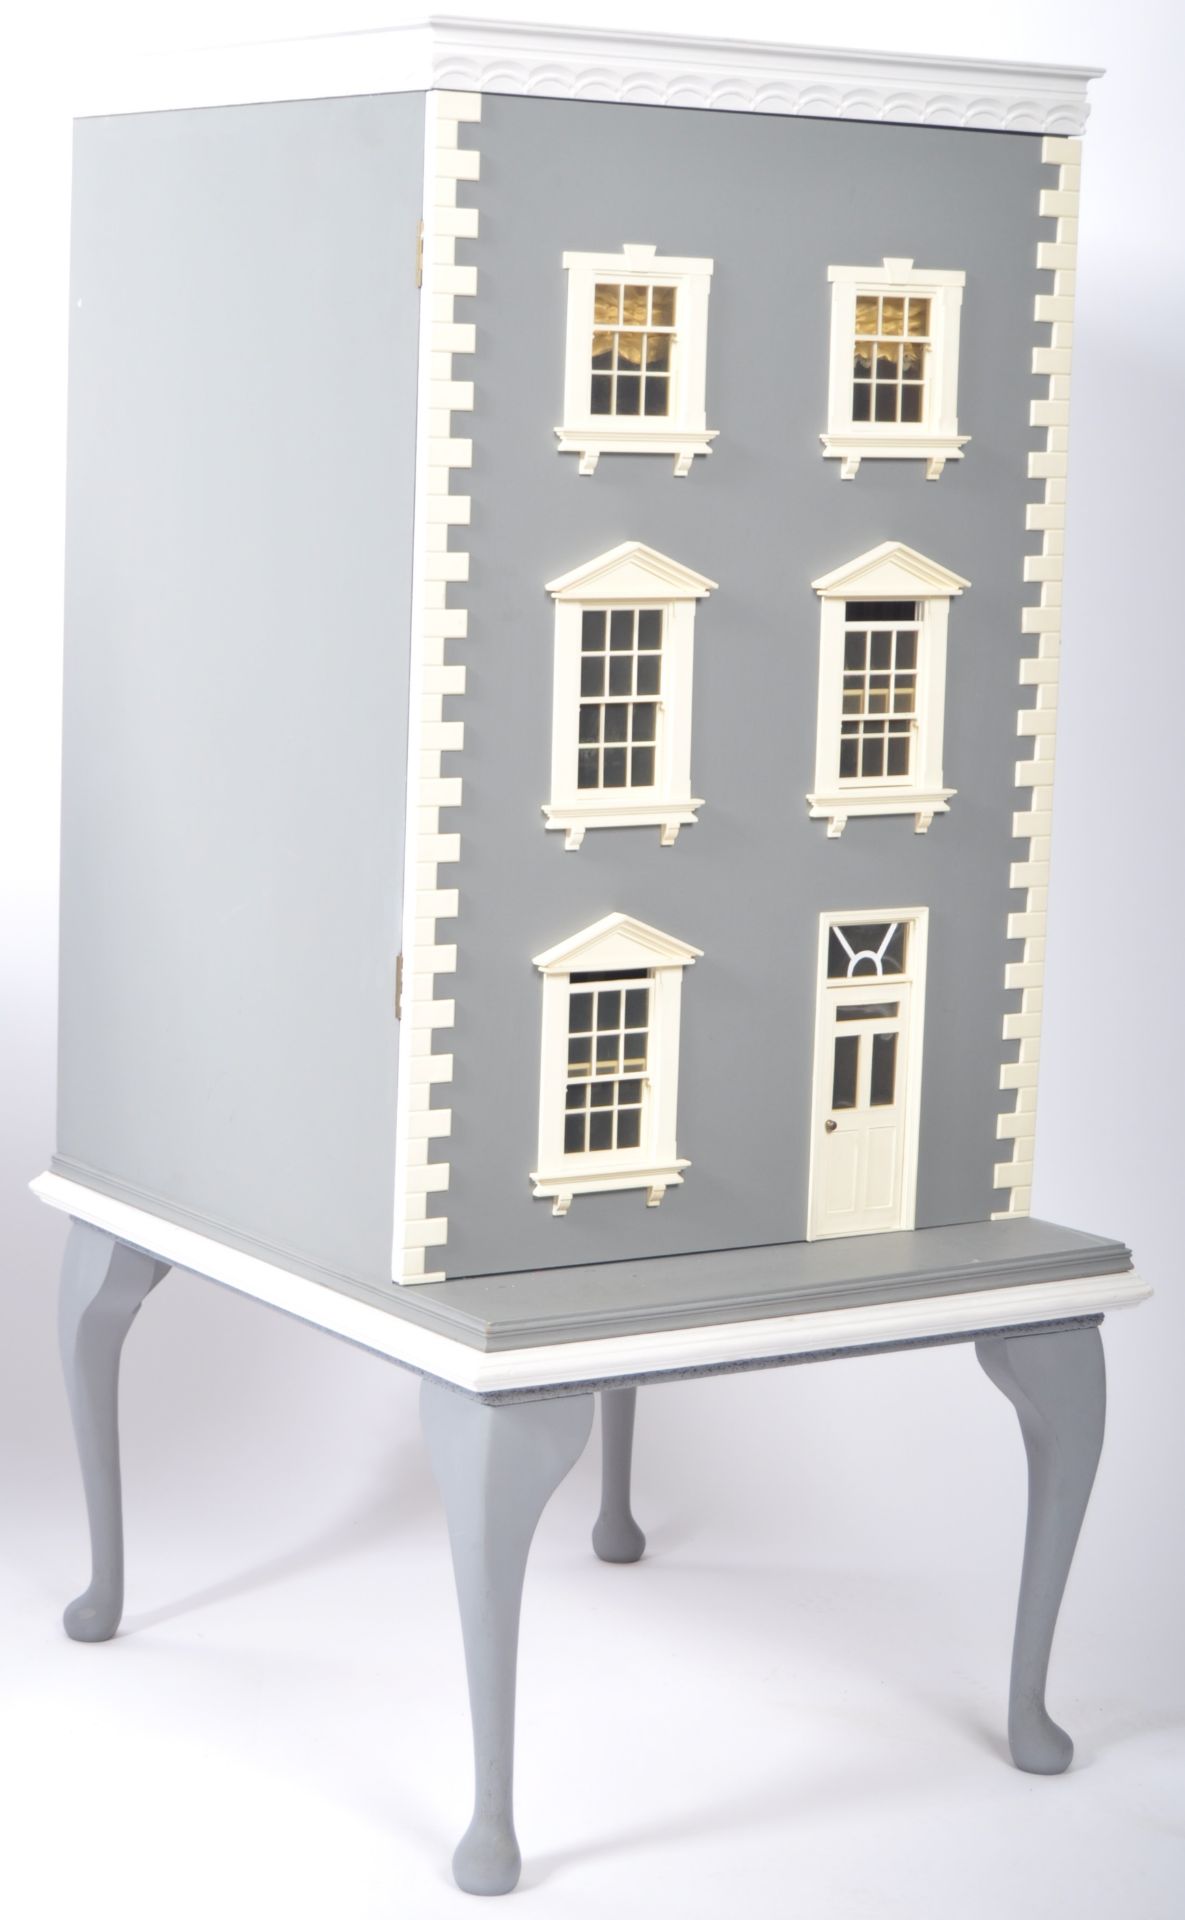 CHARMING VICTORIAN TOWNHOUSE STYLE DOLL'S HOUSE